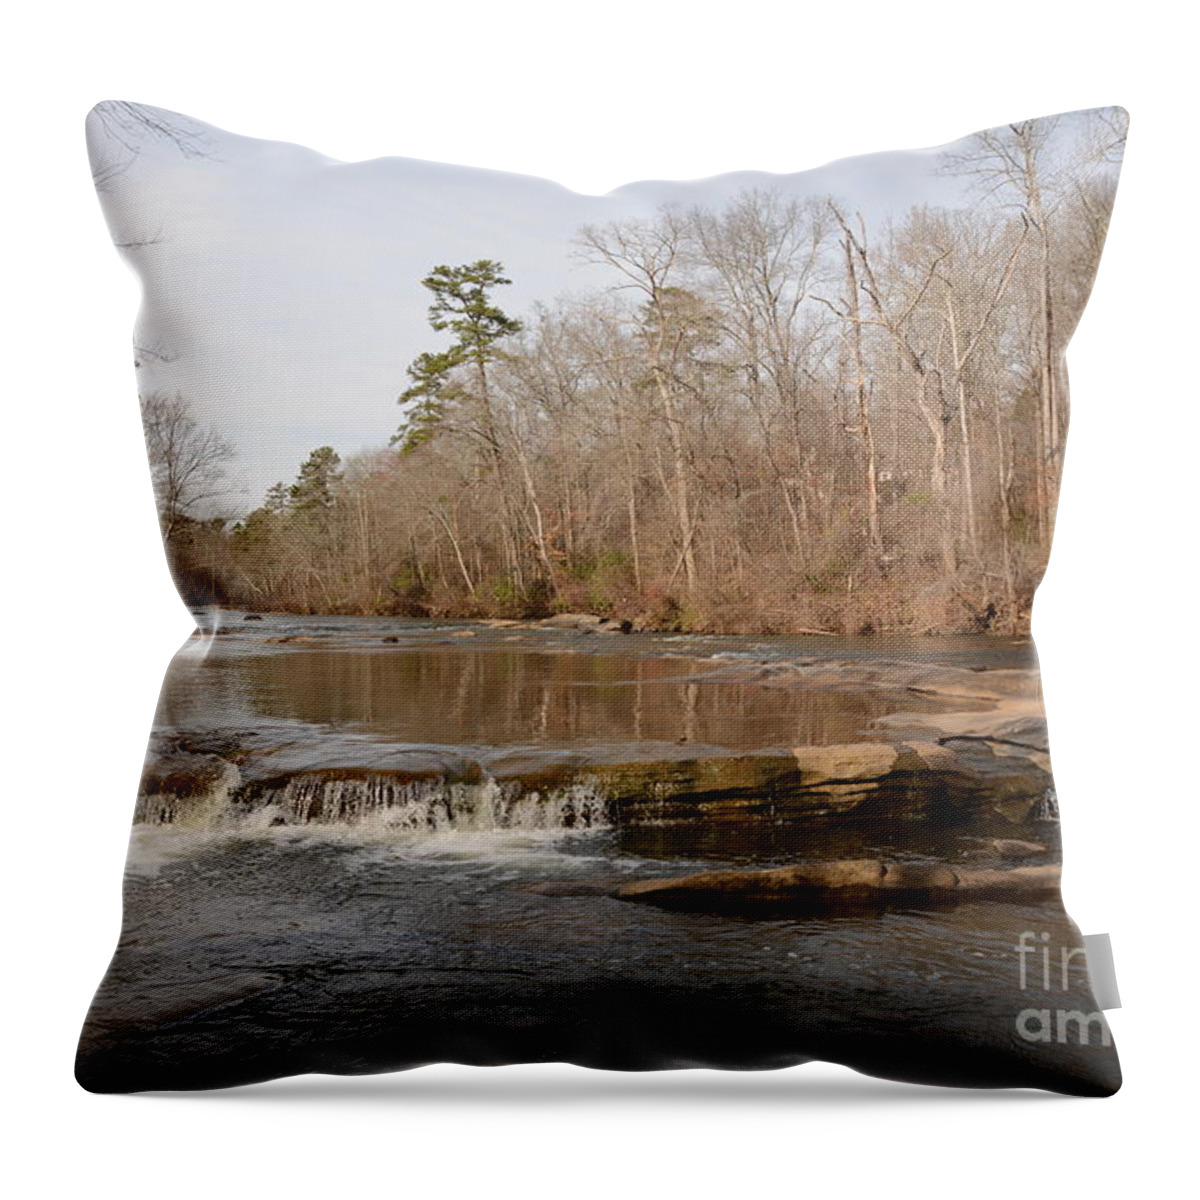 Adrian-deleon Throw Pillow featuring the photograph I love to go a Wanderin' Yellow River Park -Georgia by Adrian De Leon Art and Photography